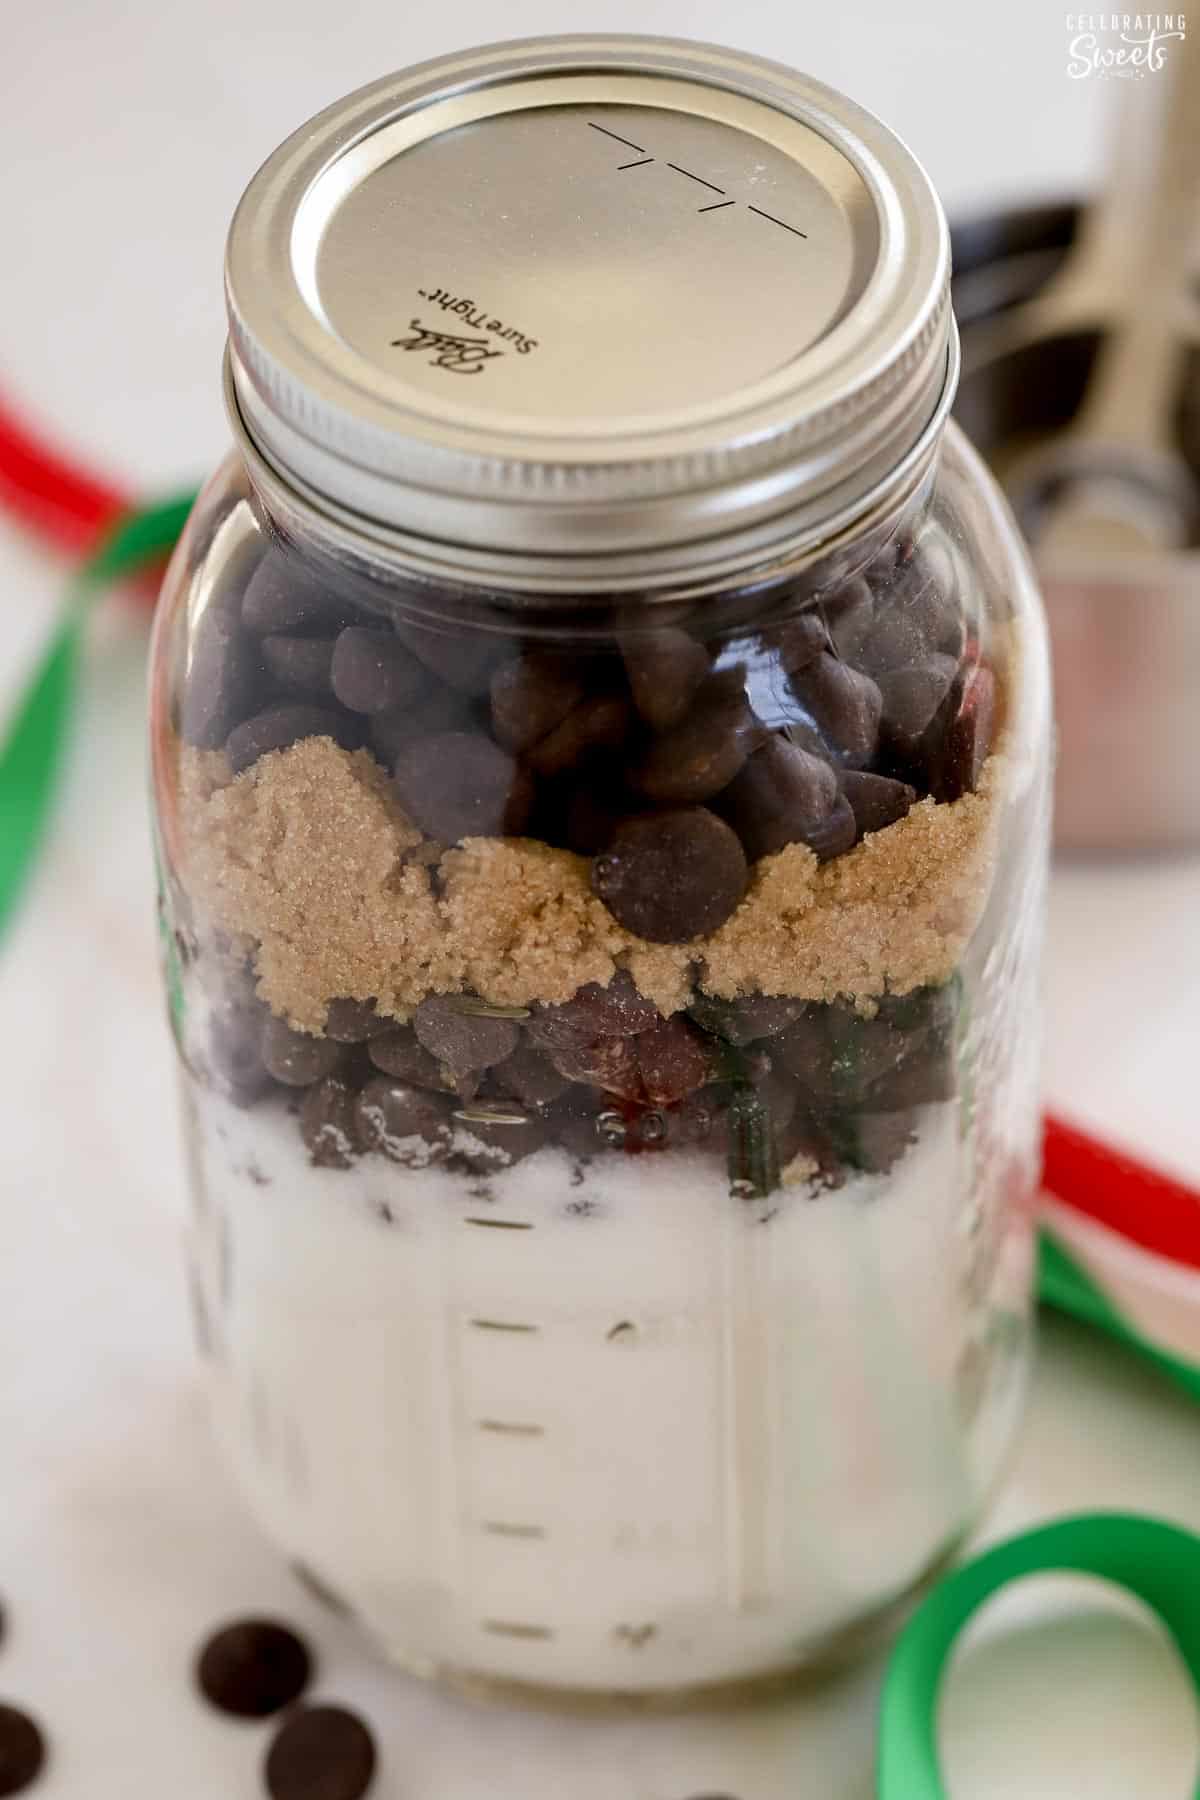 Chocolate chip cookie mix in a jar.